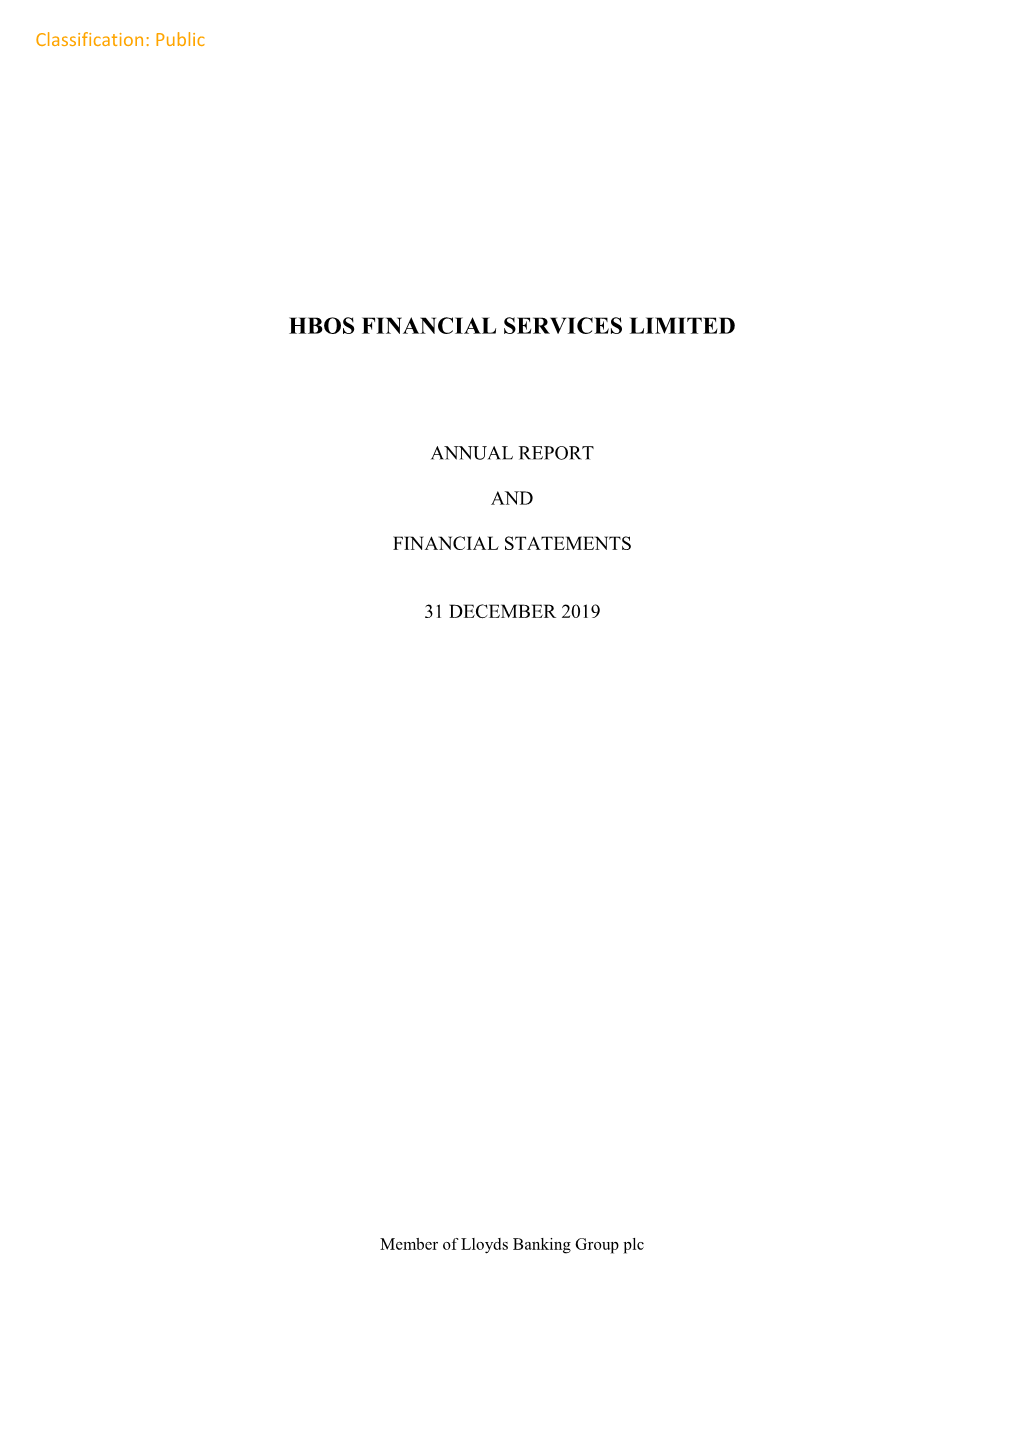 HBOS Financial Services Limited Annual Report